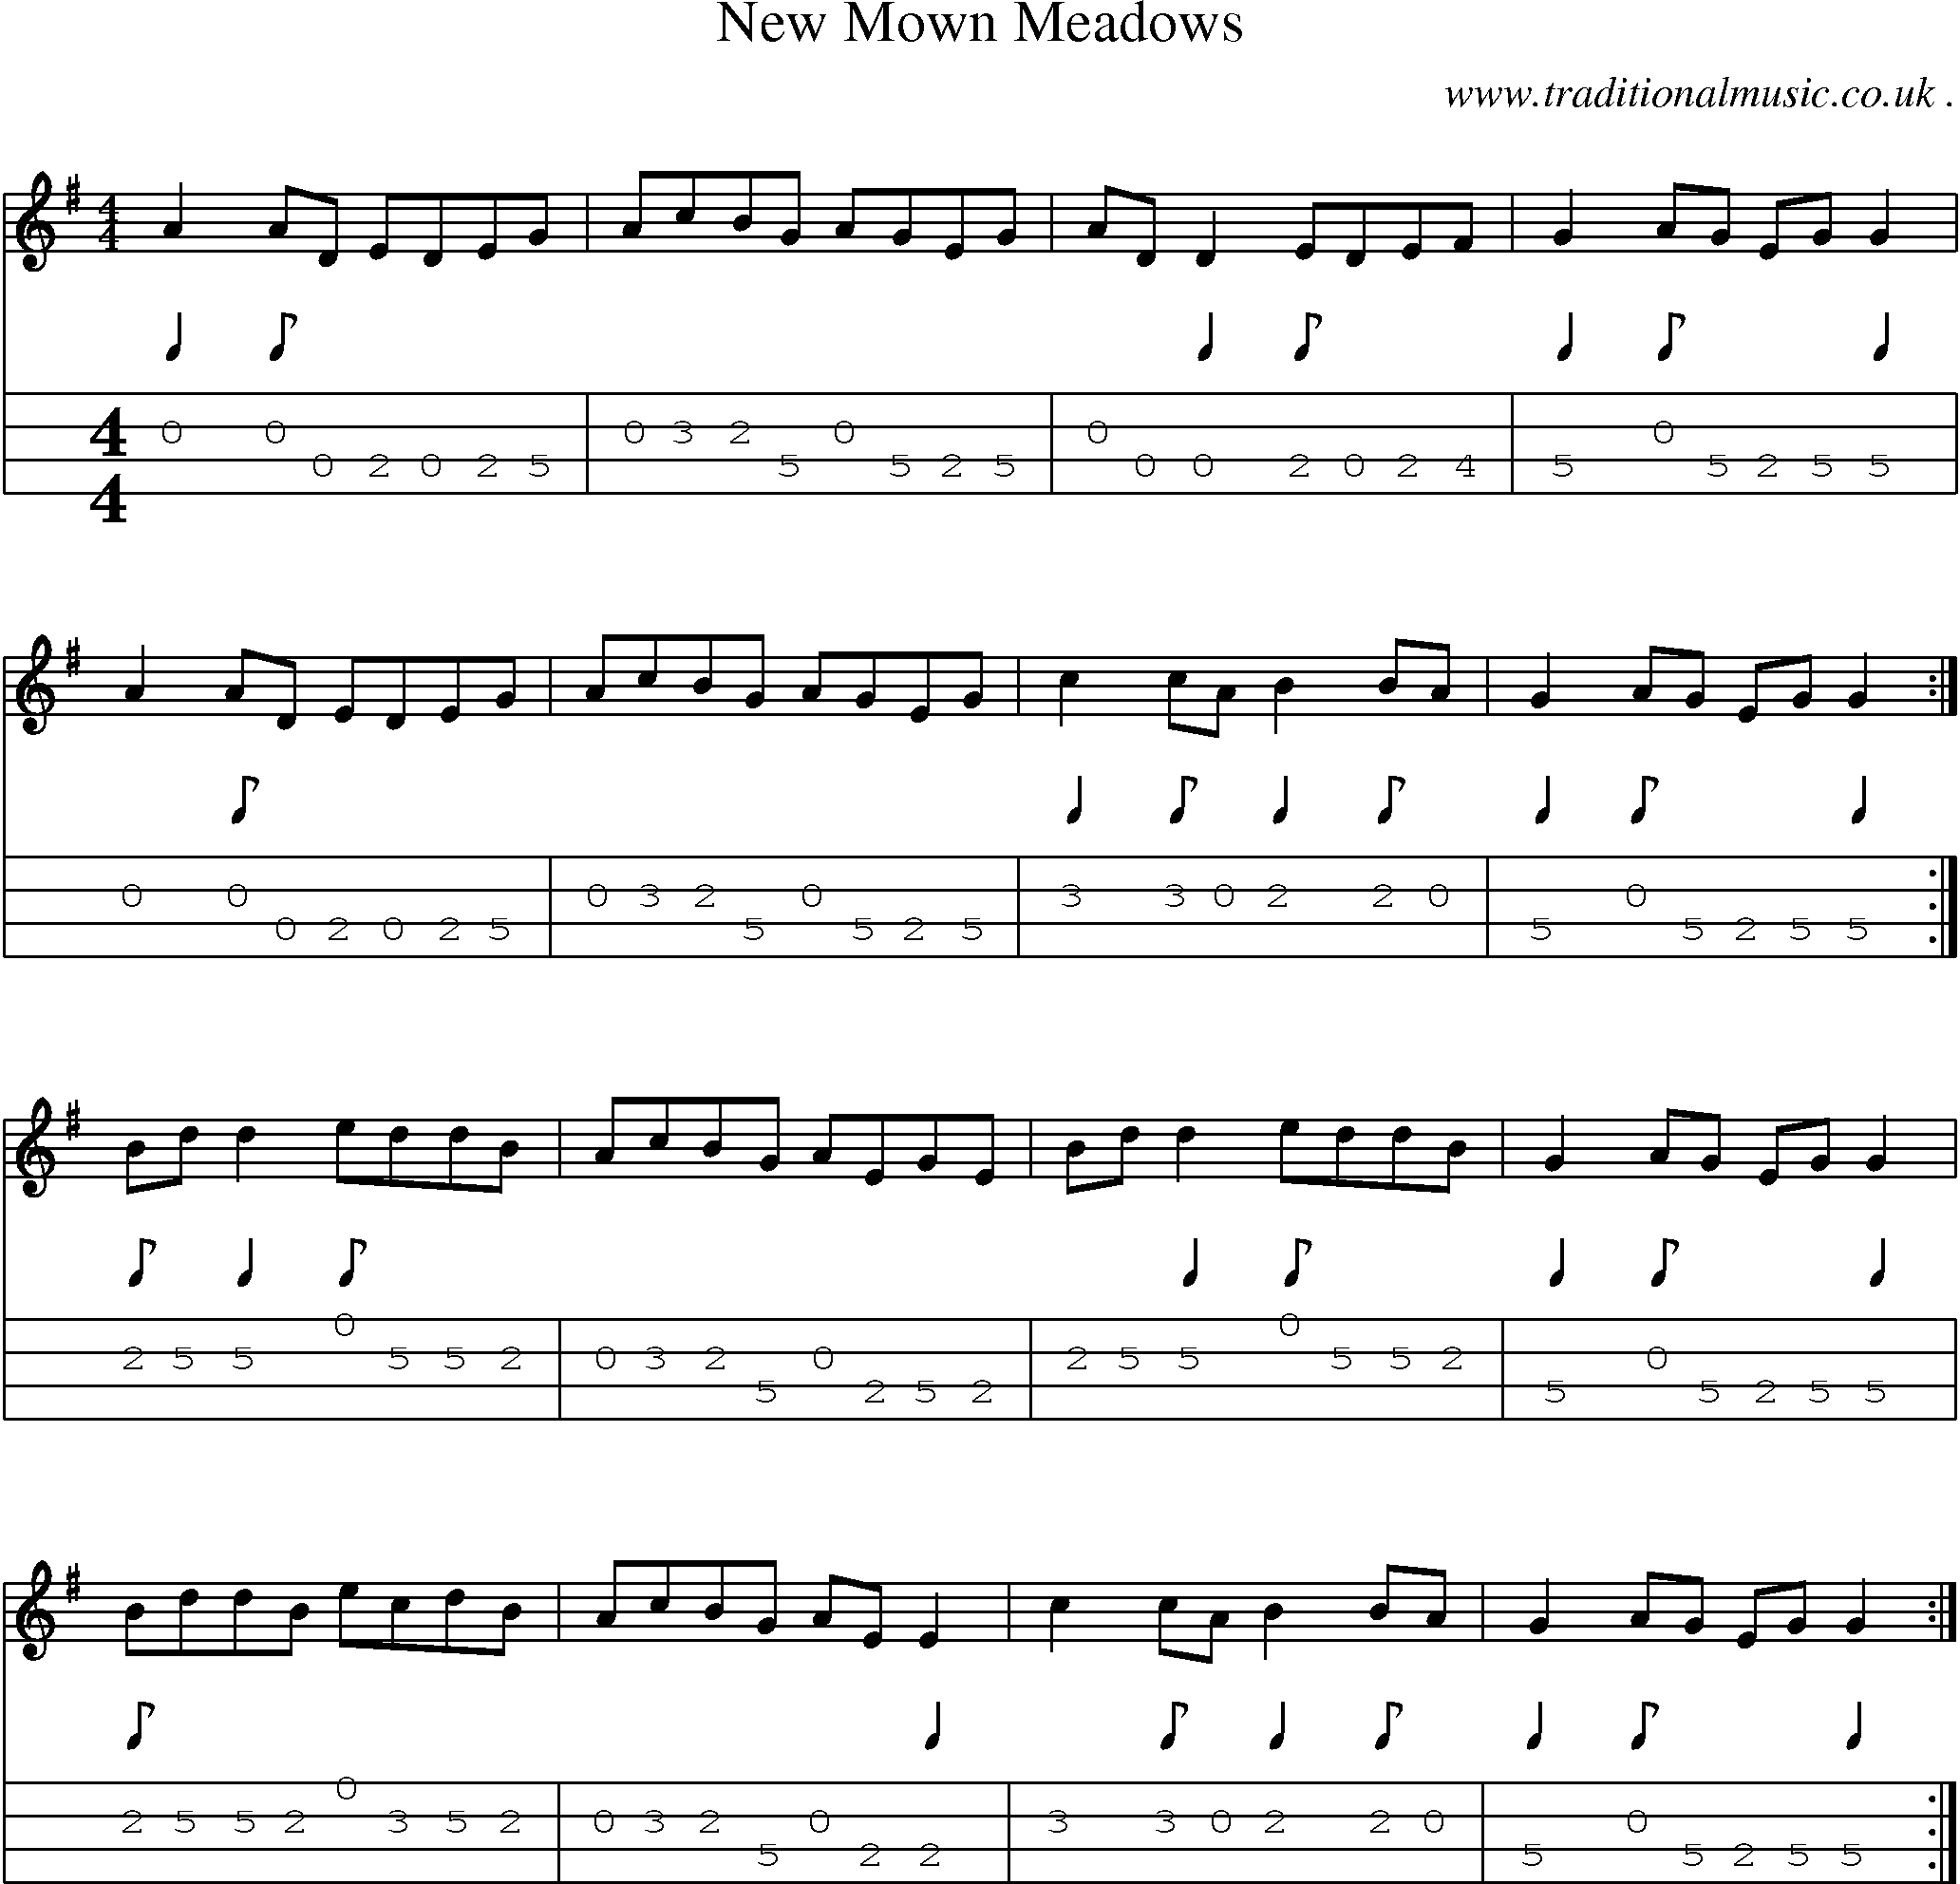 Sheet-music  score, Chords and Mandolin Tabs for New Mown Meadows